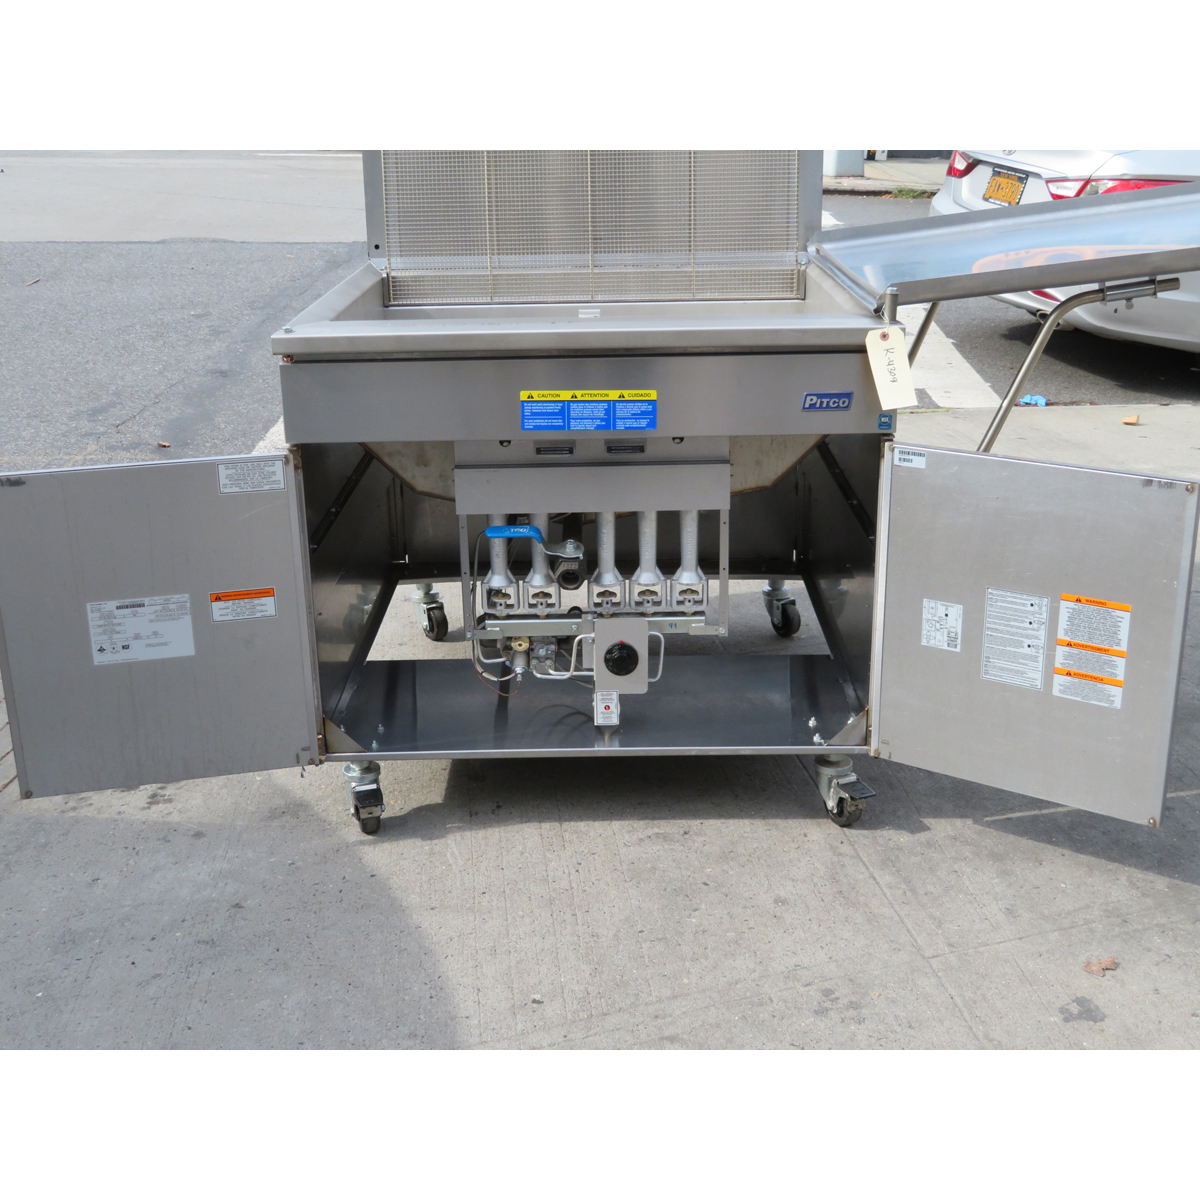 Pitco 34PSS Gas Donut Fryer with 210 Lb Oil Capacity, Brand New image 2